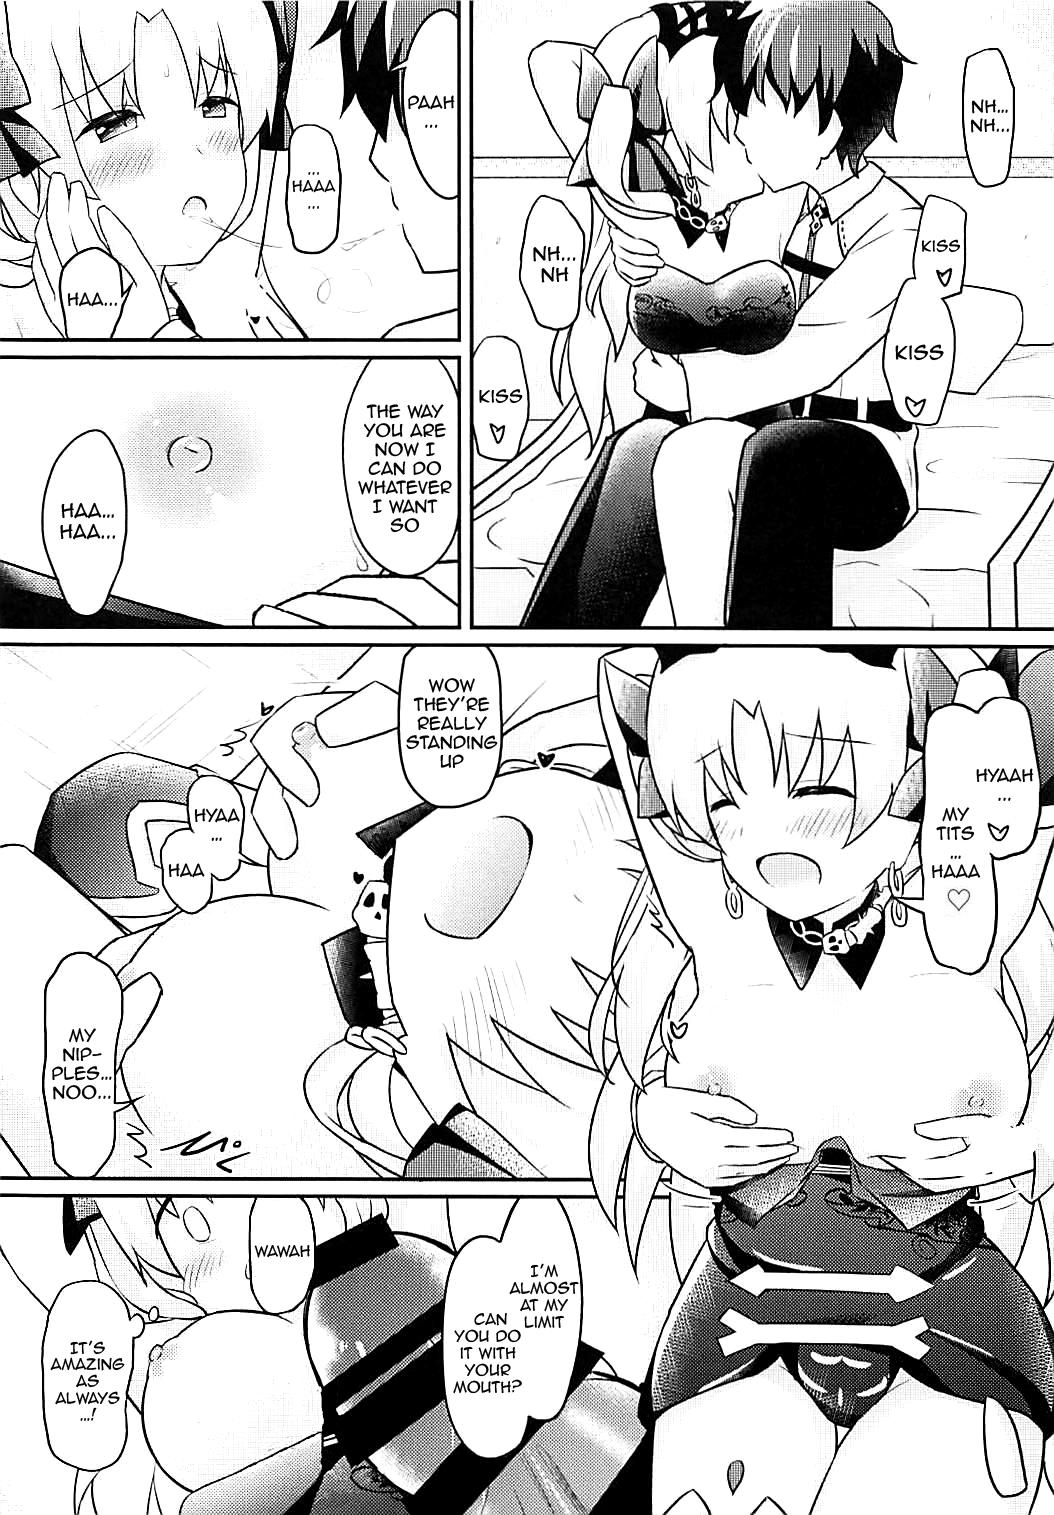 Les (C94) [Cloudy (Cloud)] Do-M Megami no Ereshkigal | M-Goddess Ereshkigal (Fate-Grand Order) [English] {Awesome Sauce} - Fate grand order Hairypussy - Page 5